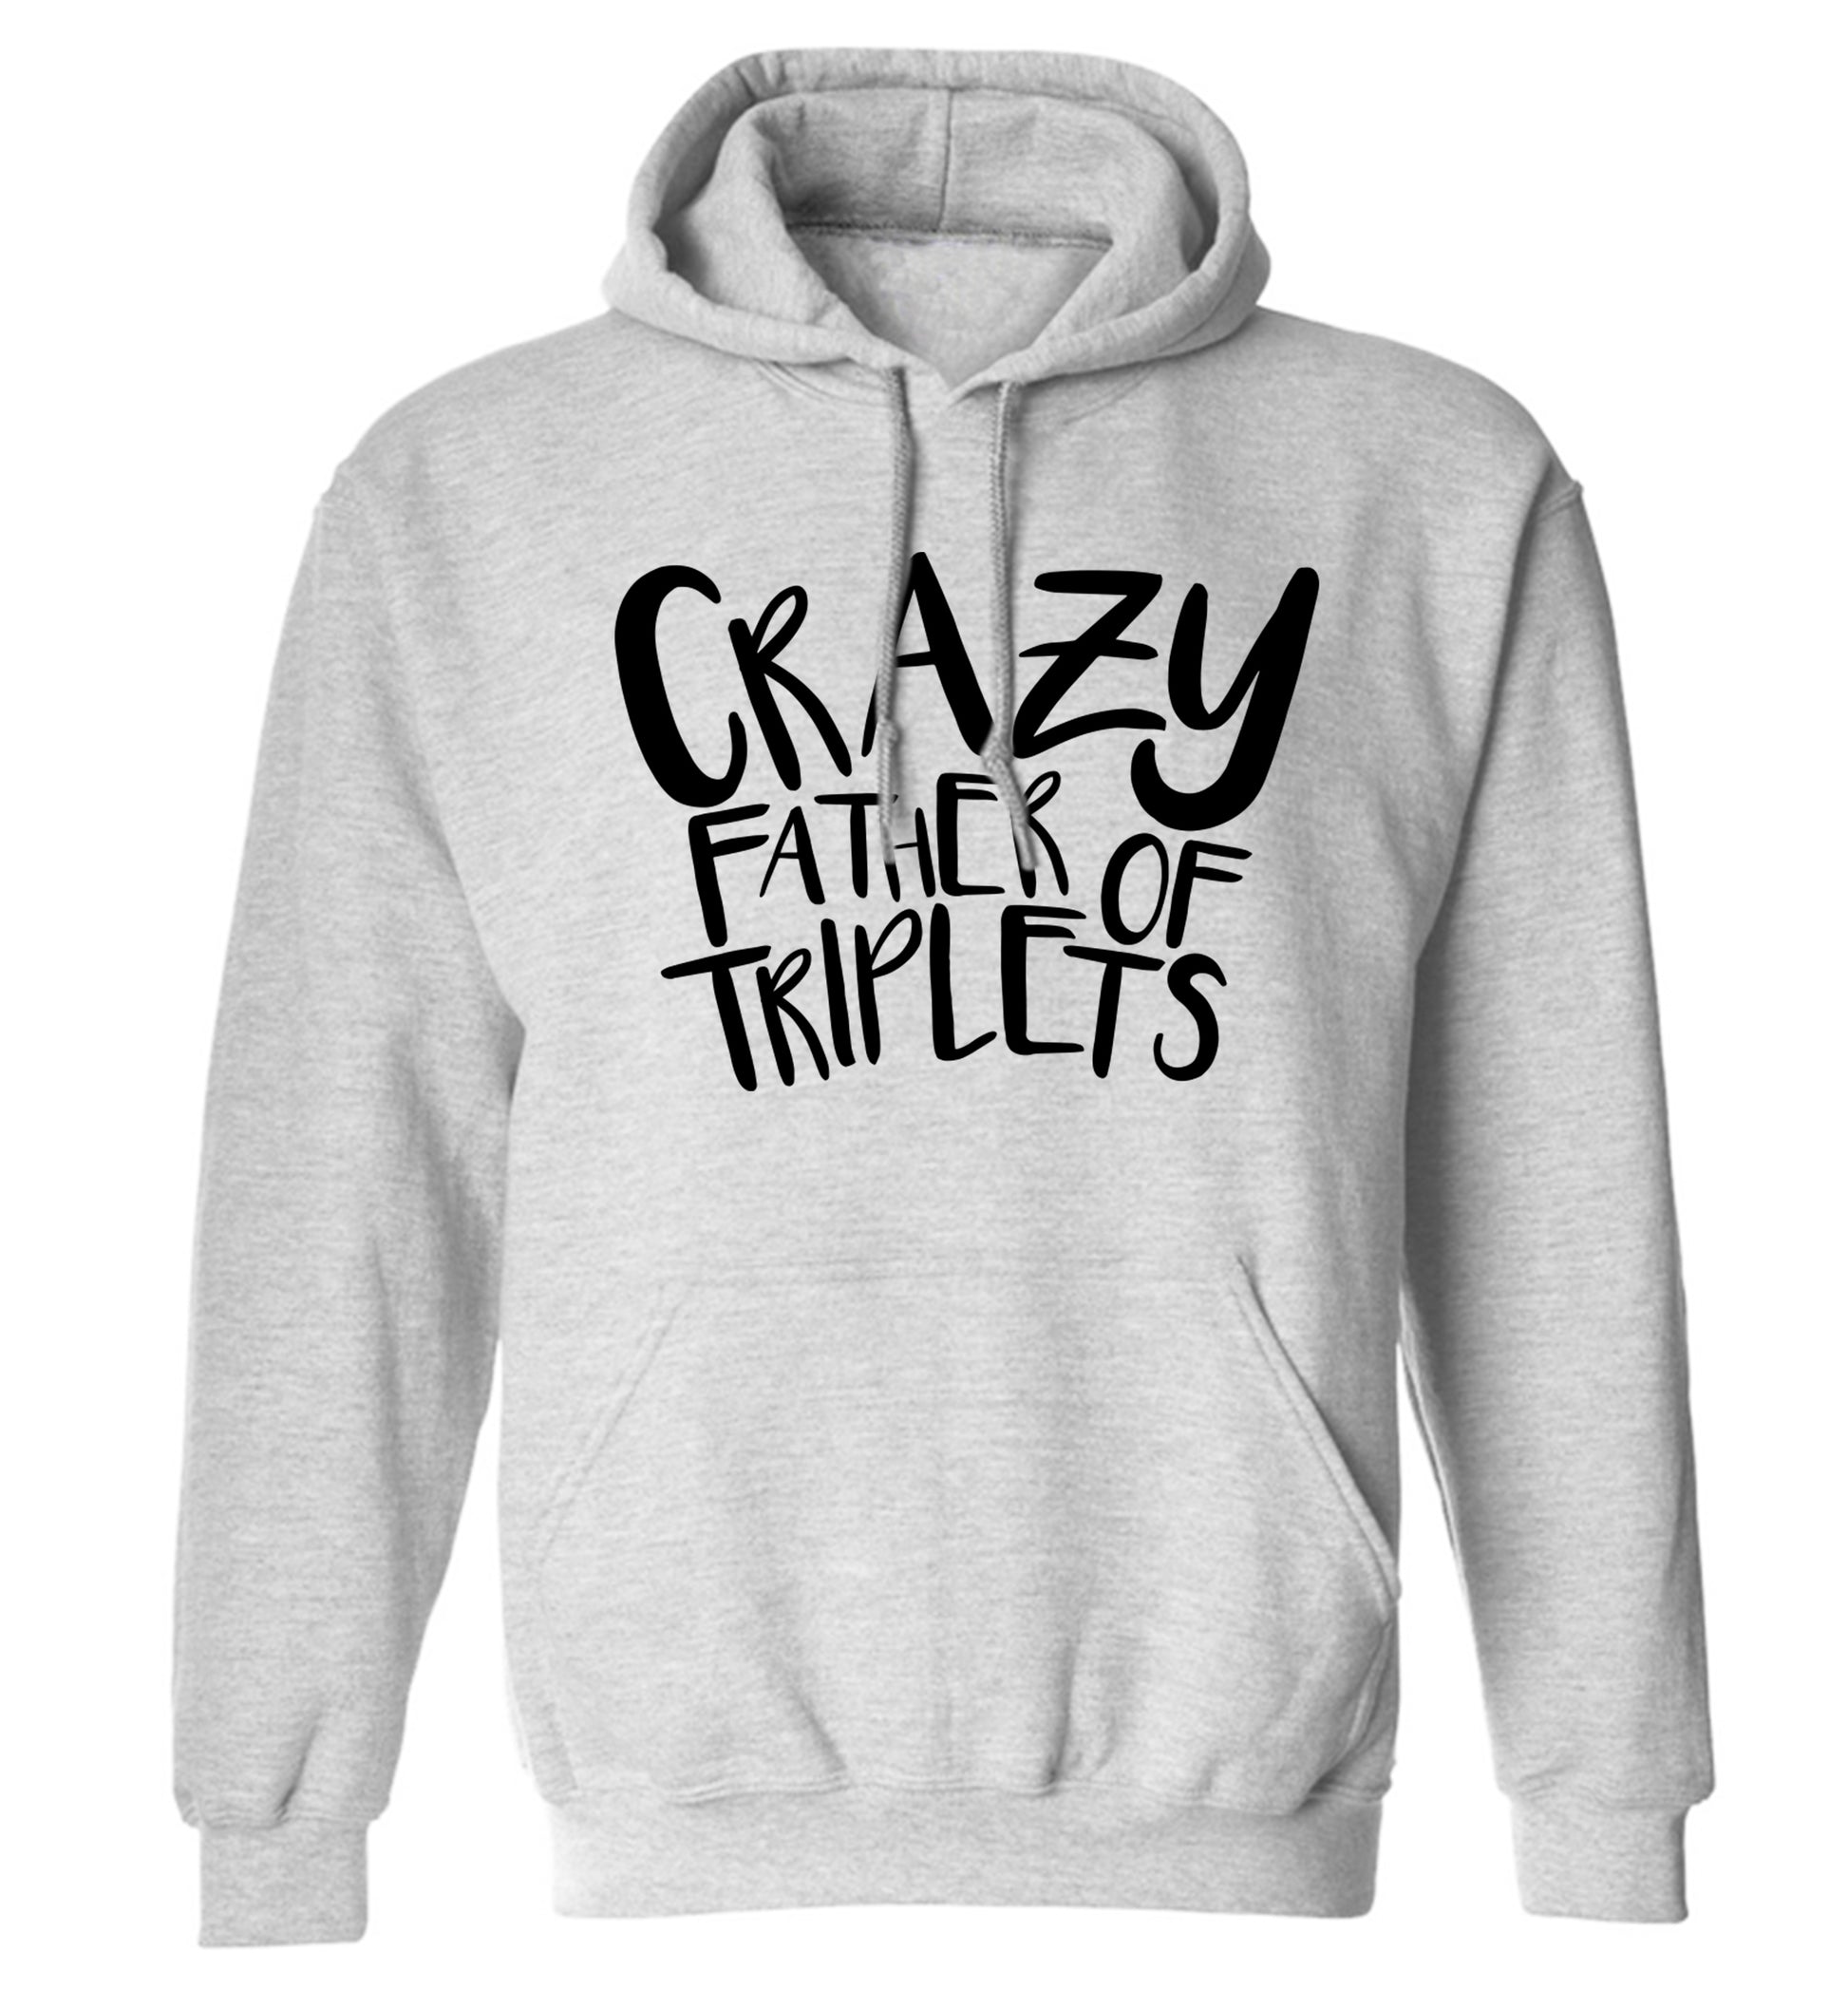 Crazy father of triplets adults unisex grey hoodie 2XL